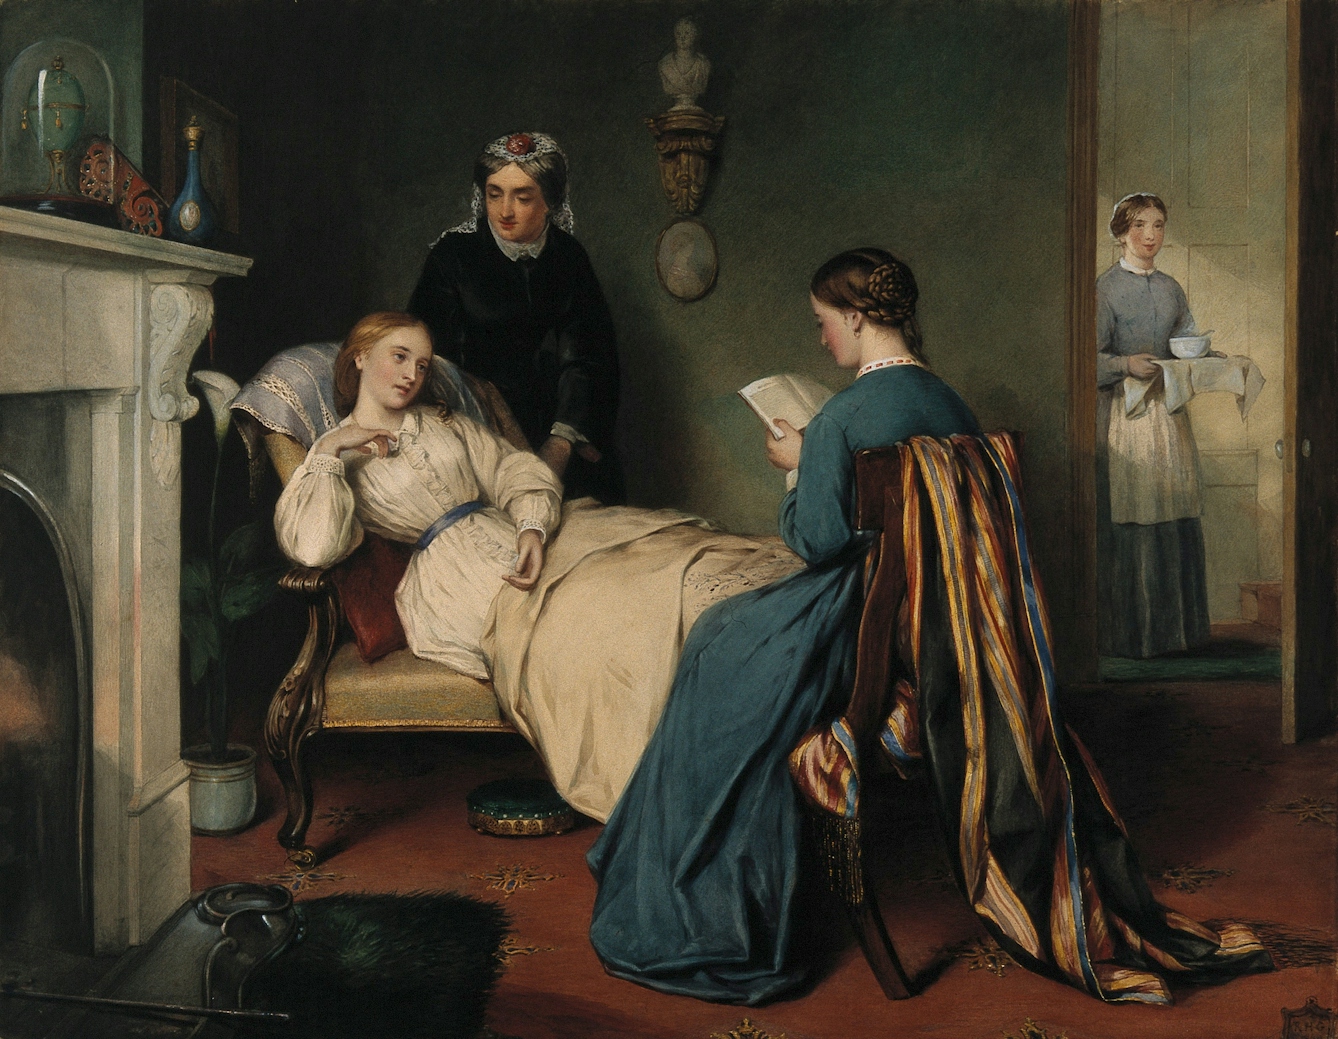 Colour painting of a young girl reclining while being attended to by three women.